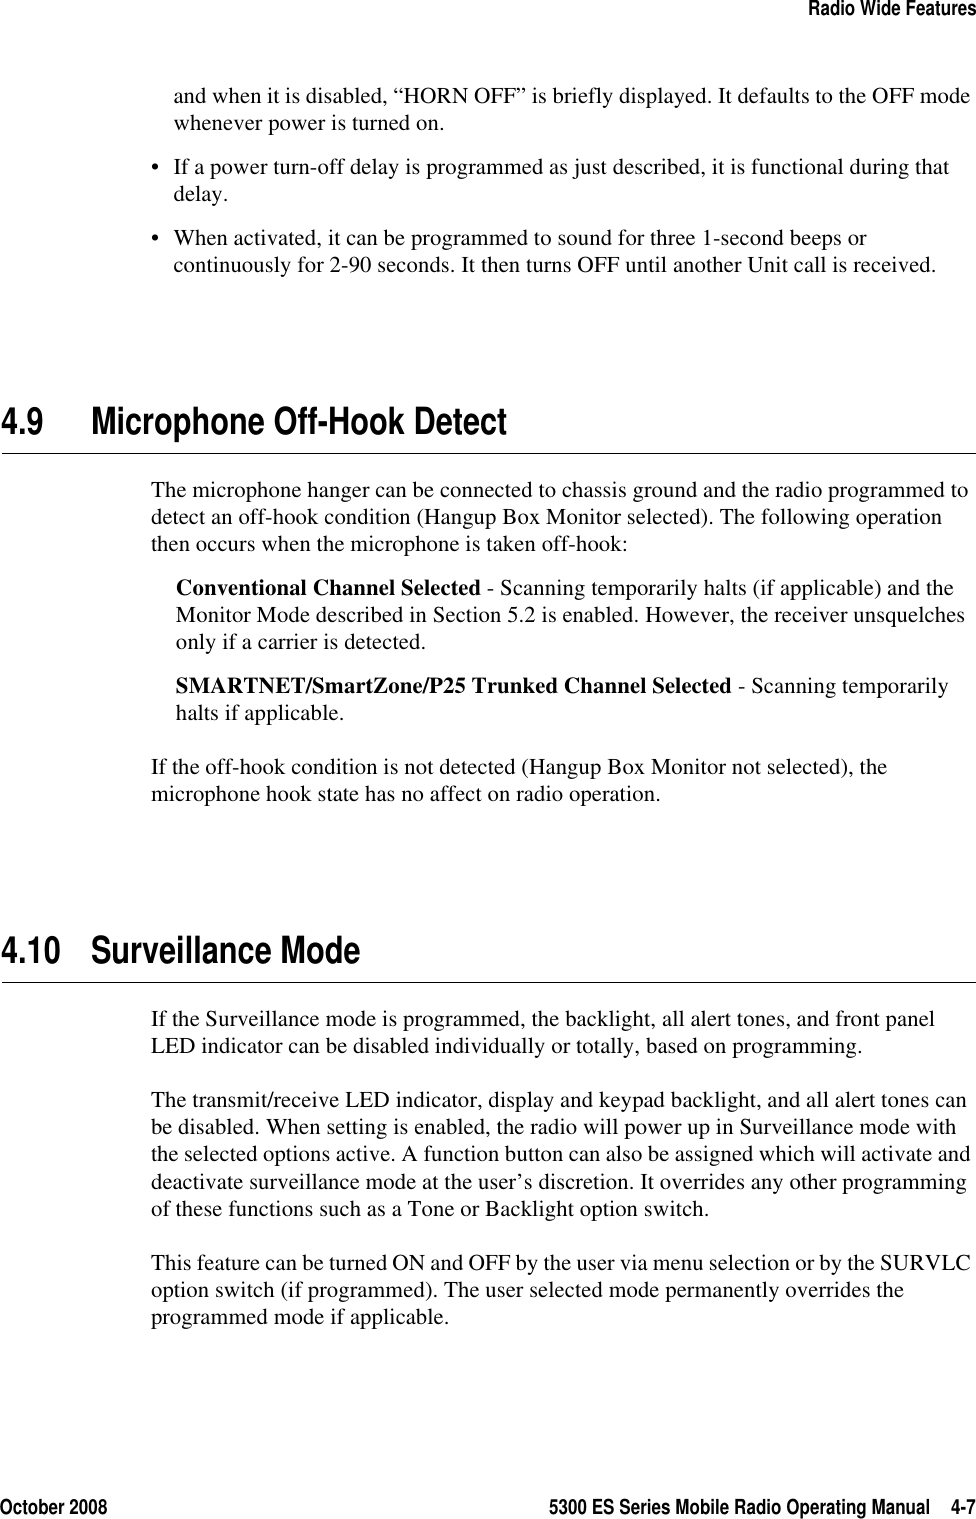 October 2008 5300 ES Series Mobile Radio Operating Manual 4-7Radio Wide Featuresand when it is disabled, “HORN OFF” is briefly displayed. It defaults to the OFF mode whenever power is turned on.• If a power turn-off delay is programmed as just described, it is functional during that delay.• When activated, it can be programmed to sound for three 1-second beeps or continuously for 2-90 seconds. It then turns OFF until another Unit call is received.4.9 Microphone Off-Hook DetectThe microphone hanger can be connected to chassis ground and the radio programmed to detect an off-hook condition (Hangup Box Monitor selected). The following operation then occurs when the microphone is taken off-hook:Conventional Channel Selected - Scanning temporarily halts (if applicable) and the Monitor Mode described in Section 5.2 is enabled. However, the receiver unsquelches only if a carrier is detected.SMARTNET/SmartZone/P25 Trunked Channel Selected - Scanning temporarily halts if applicable.If the off-hook condition is not detected (Hangup Box Monitor not selected), the microphone hook state has no affect on radio operation.4.10 Surveillance ModeIf the Surveillance mode is programmed, the backlight, all alert tones, and front panel LED indicator can be disabled individually or totally, based on programming.The transmit/receive LED indicator, display and keypad backlight, and all alert tones can be disabled. When setting is enabled, the radio will power up in Surveillance mode with the selected options active. A function button can also be assigned which will activate and deactivate surveillance mode at the user’s discretion. It overrides any other programming of these functions such as a Tone or Backlight option switch.This feature can be turned ON and OFF by the user via menu selection or by the SURVLC option switch (if programmed). The user selected mode permanently overrides the programmed mode if applicable.